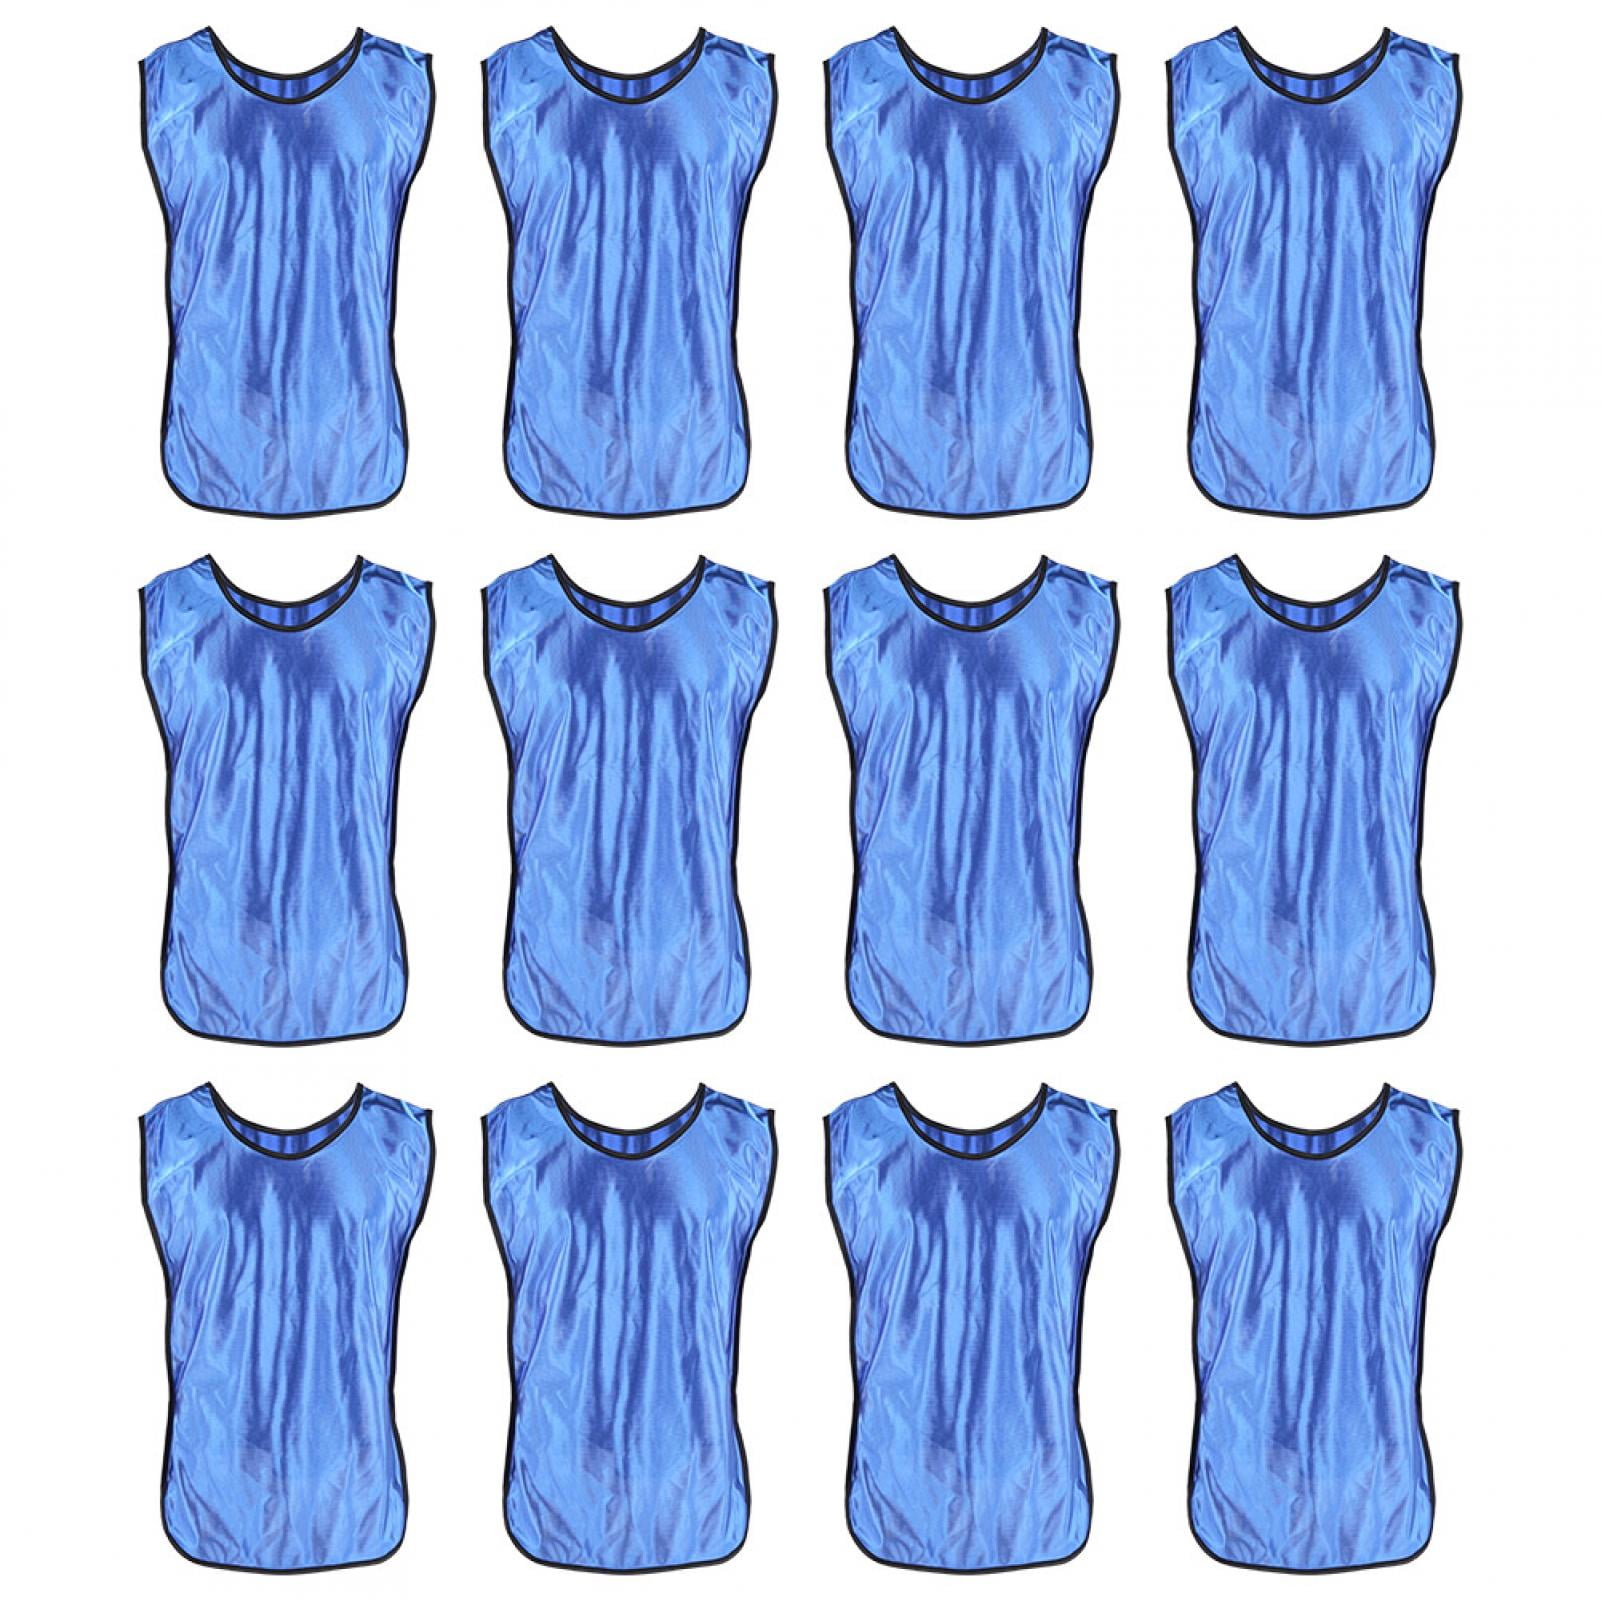 12pcs Adult Training Vest Practice Pinnies Free Size for Football Basketball 